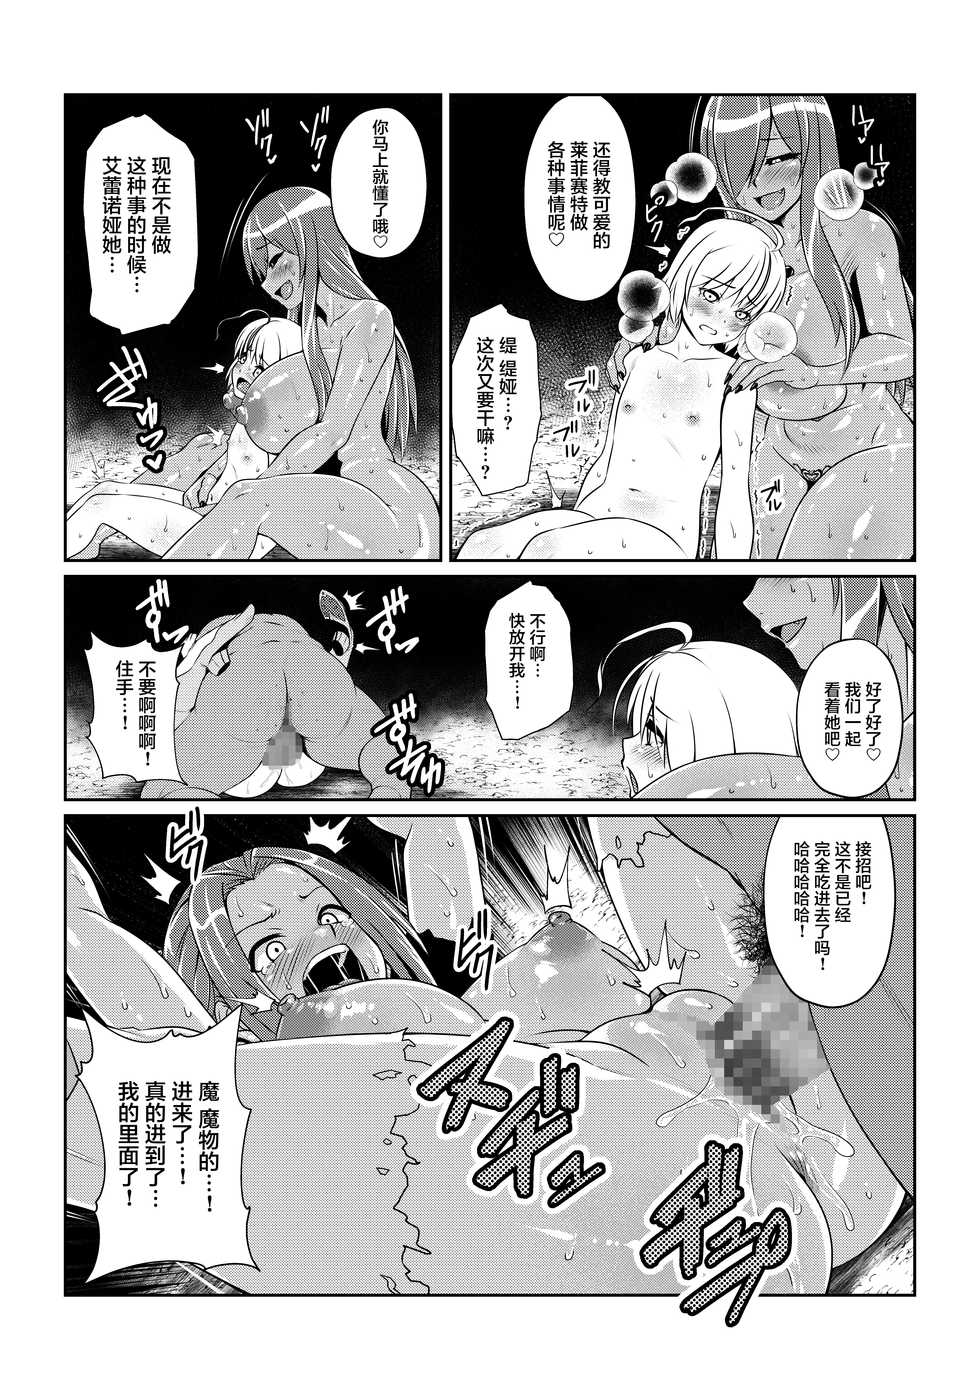 [Fuwa Fuwa Pinkchan] Tales Of DarkSide ~Seirei~ (Tales of Series) [Chinese] [不咕鸟汉化组] - Page 12